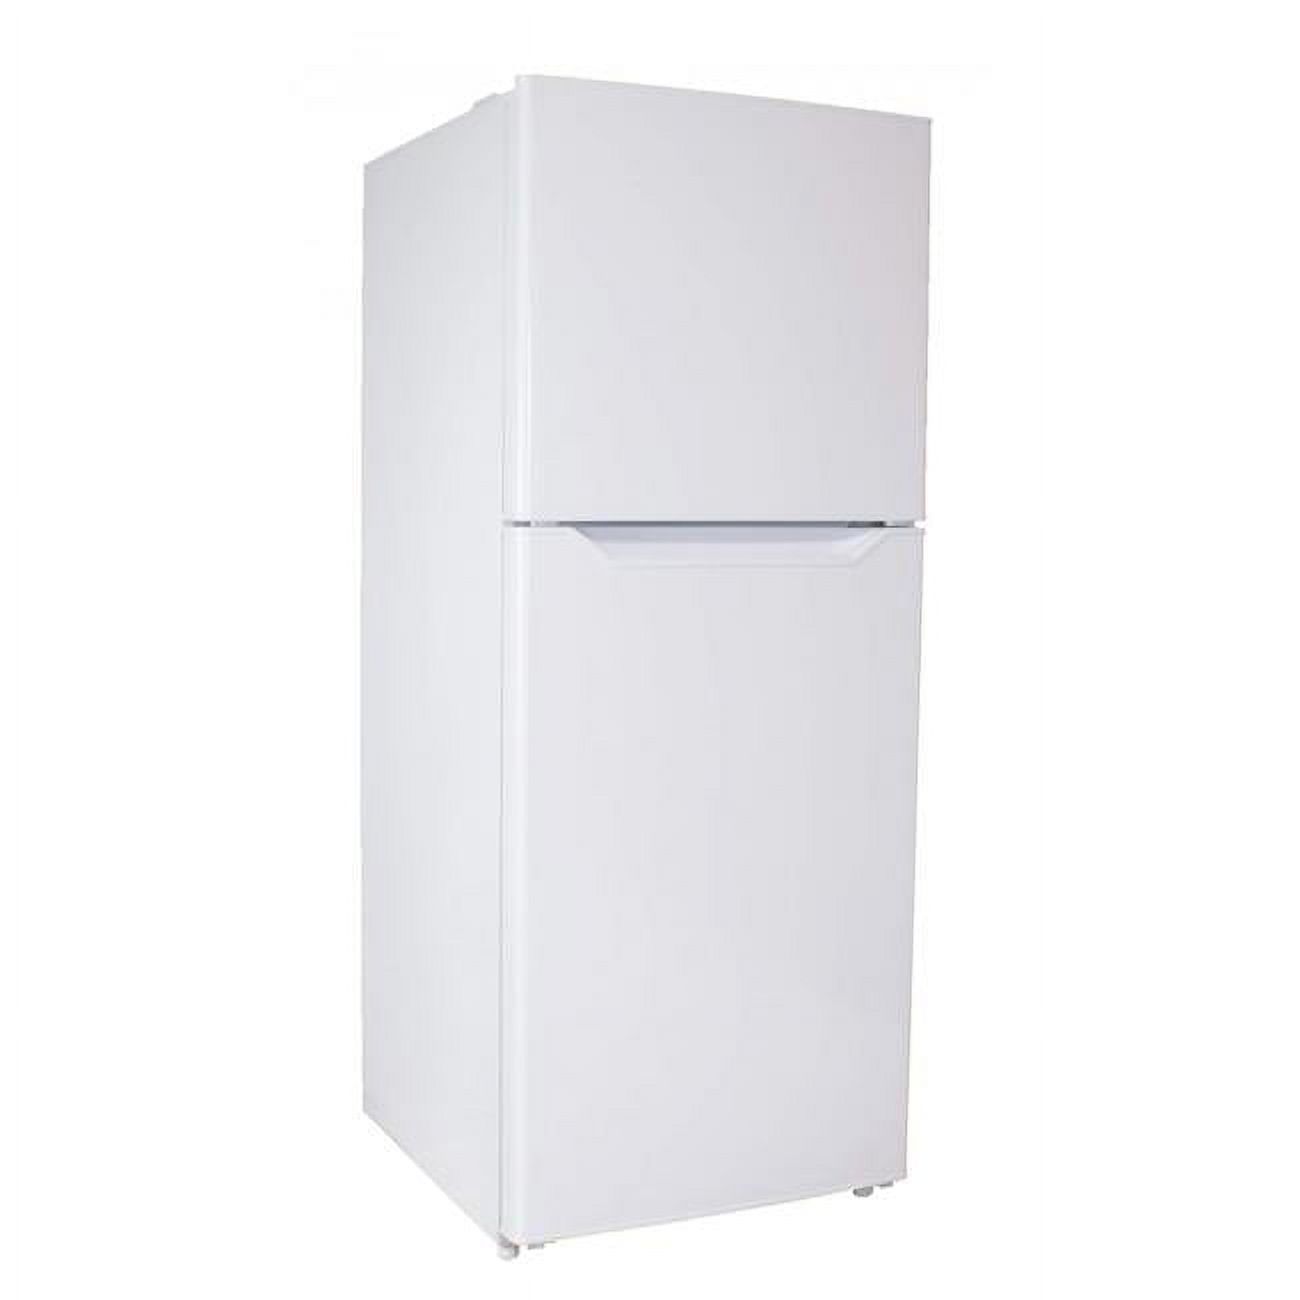 Danby 10.1 cu. ft. Apartment Size Refrigerator, White - image 1 of 9